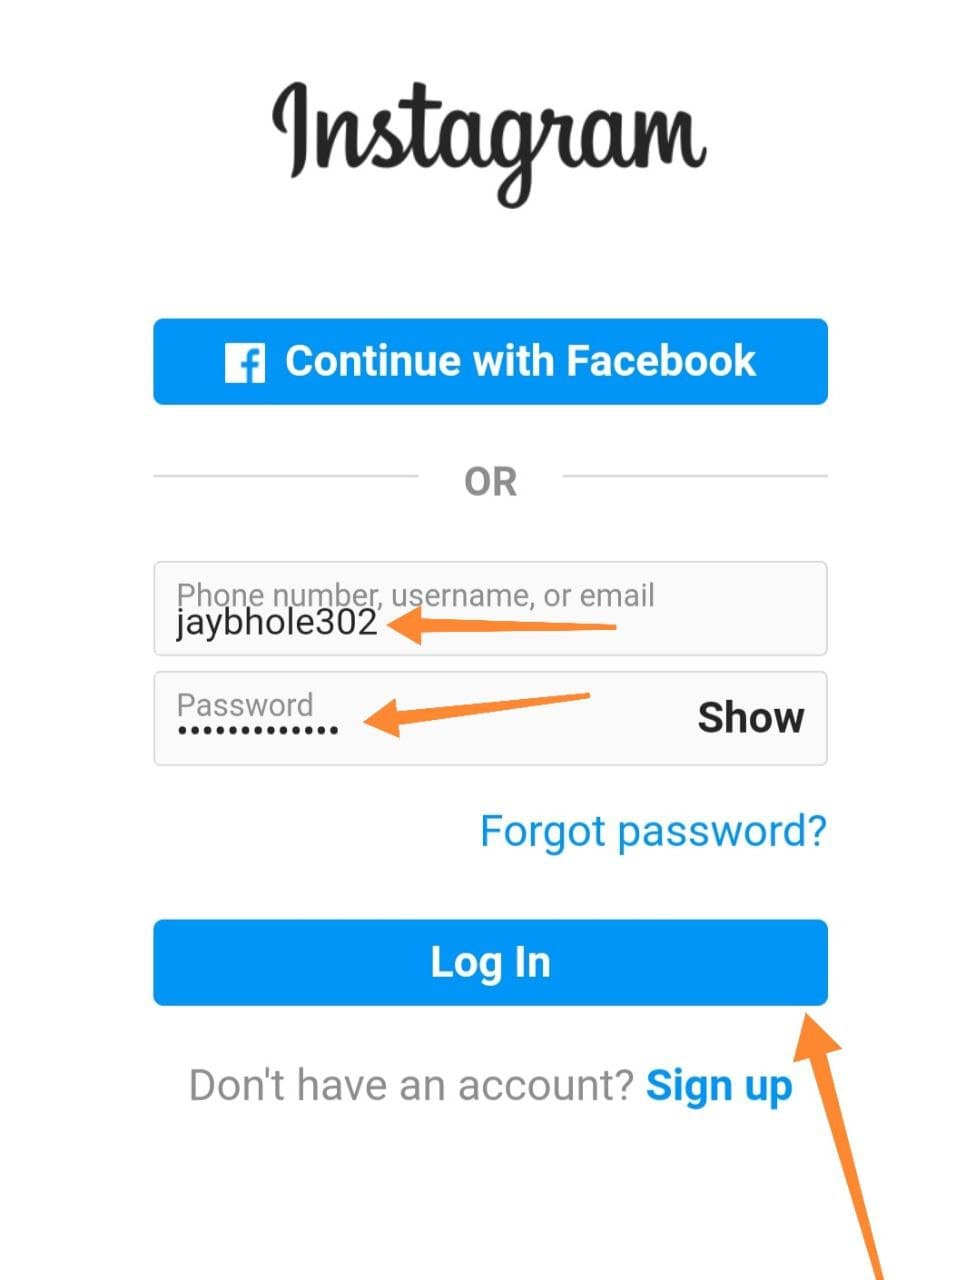 Login With Instagram Account